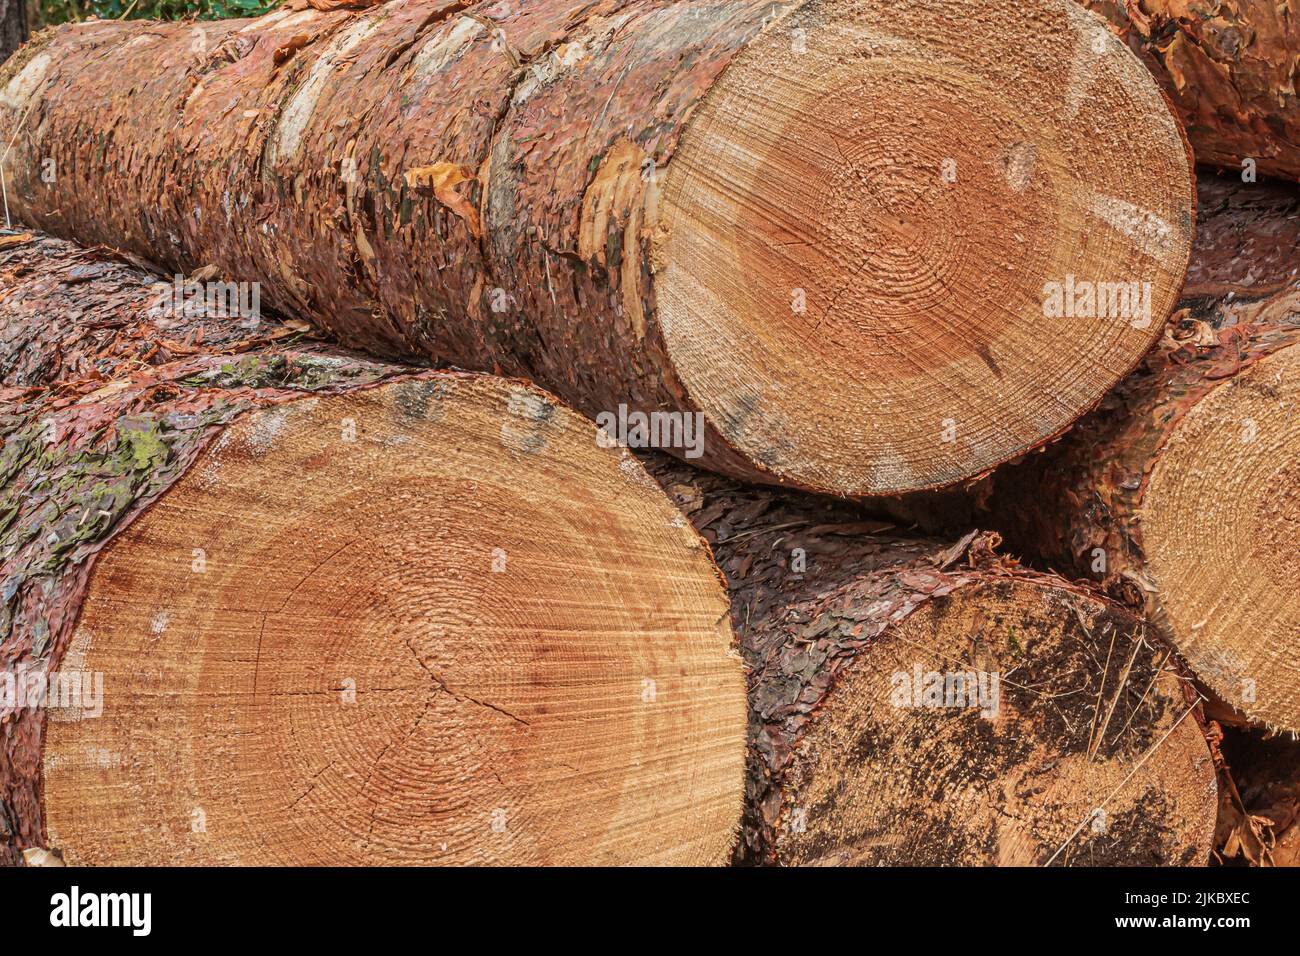 large stumps in a heap. Pine trunks after felling in the forest. Sawn tree trunks with bark. Annual rings in cross-section in reddish, brown, yellow Stock Photo